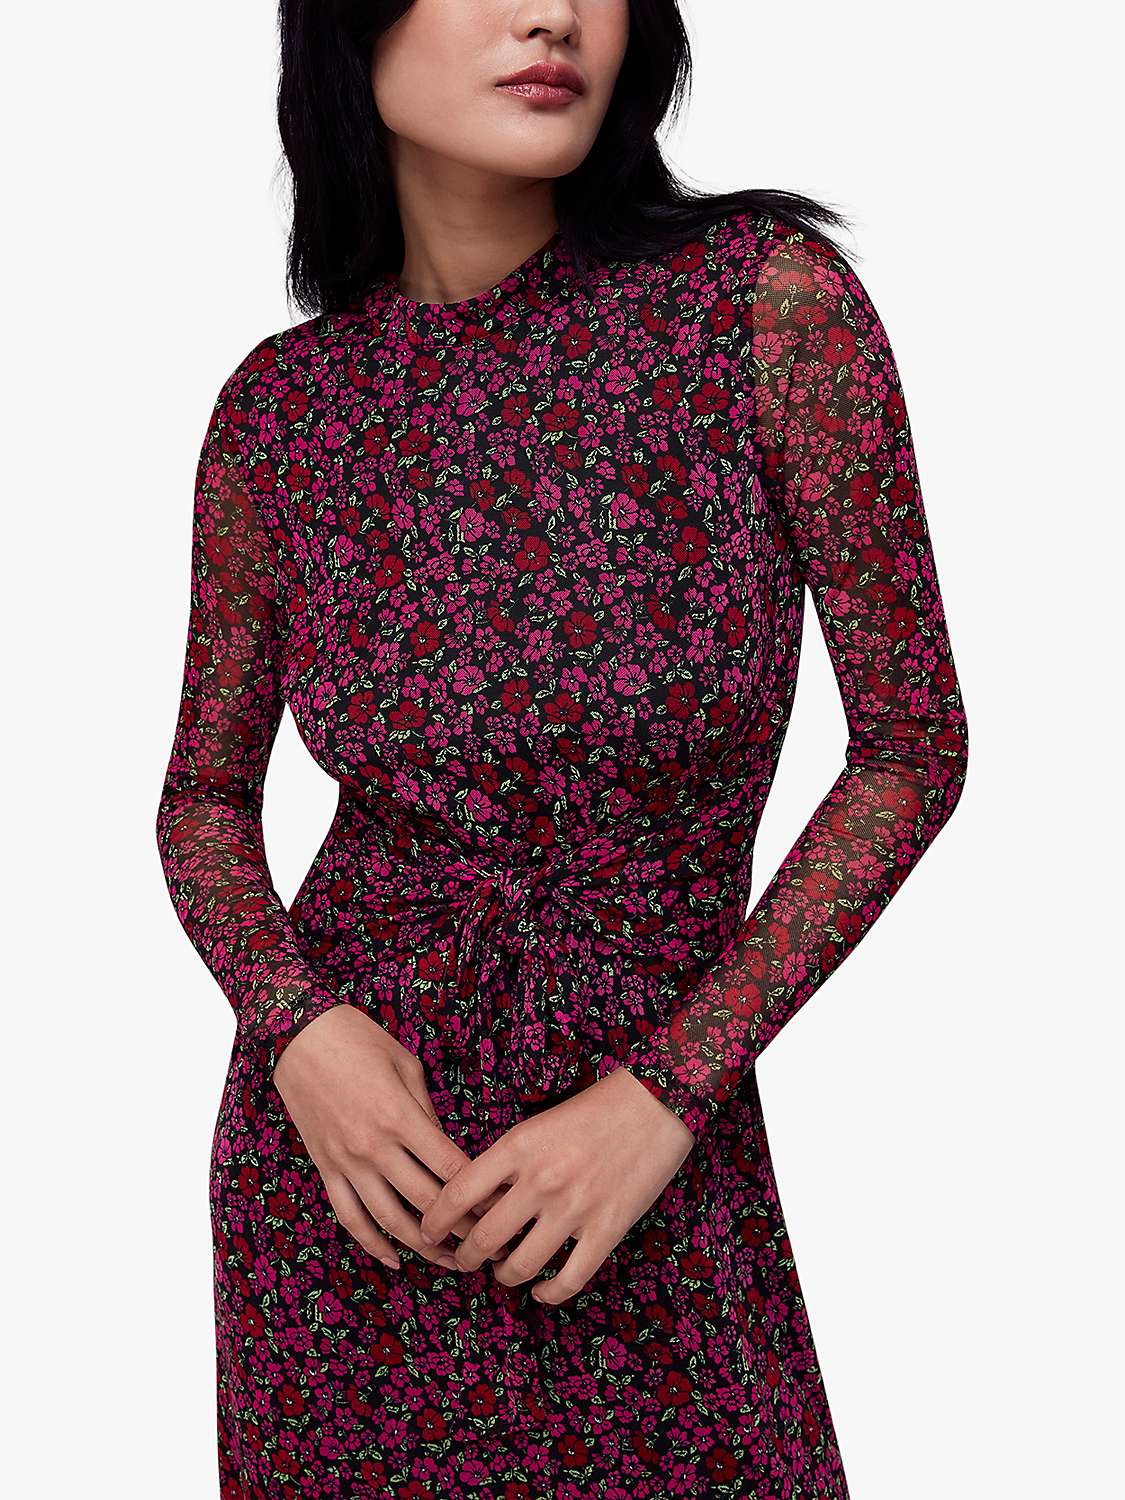 Buy Whistles Outlined Floral Tie Mesh Midi Dress, Pink/Multi Online at johnlewis.com